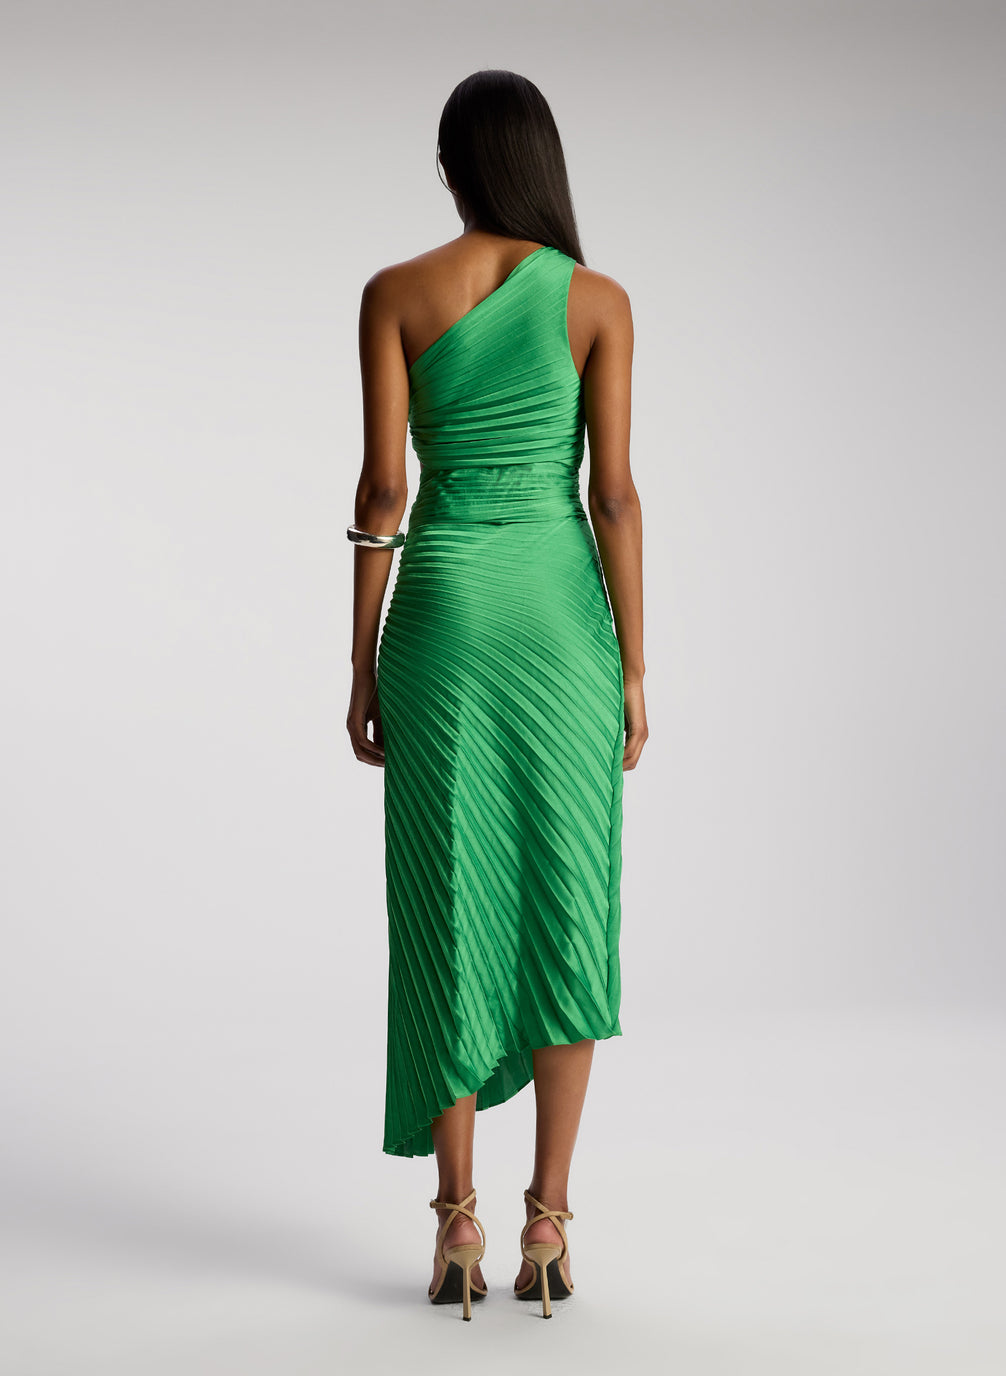 back view of woman wearing green pleated one shoulder dress